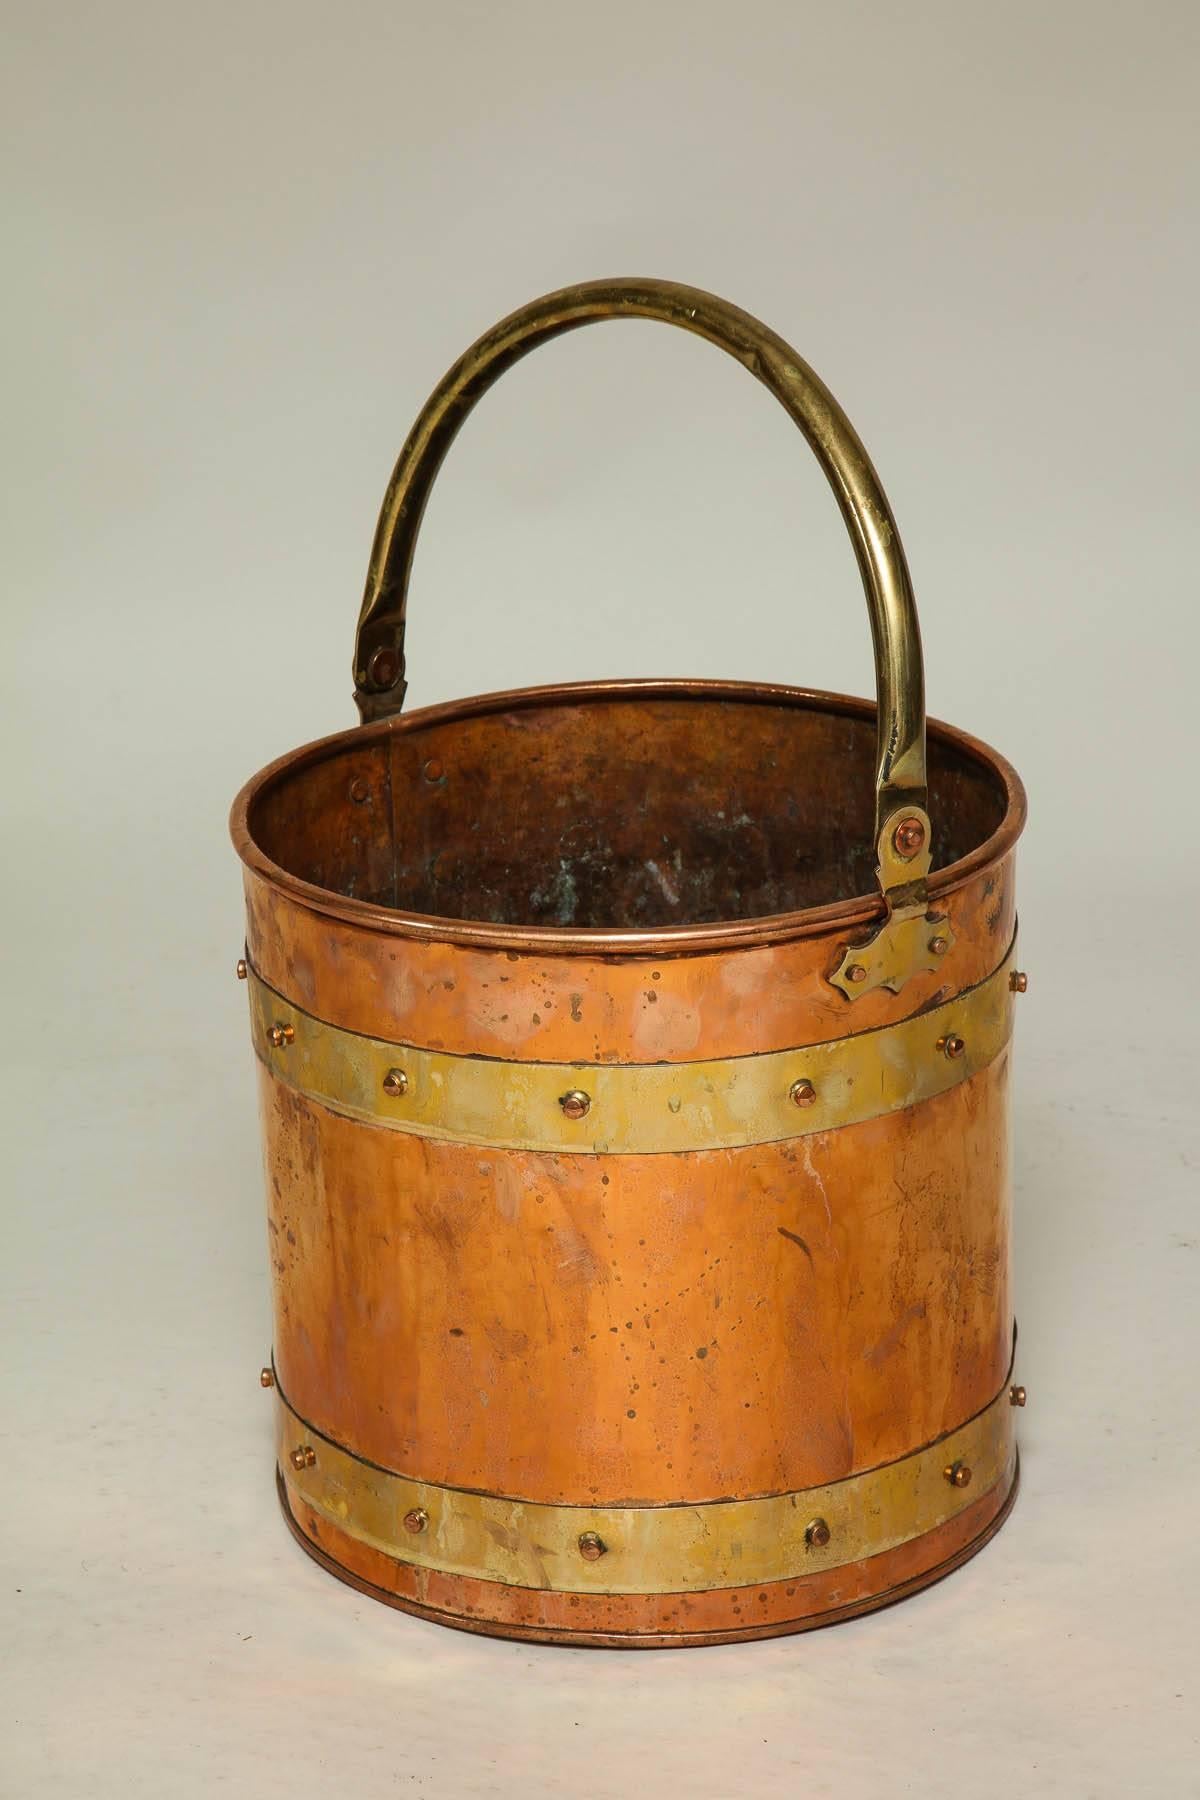 Good early 20th century English copper bucket with brass bands and bail handle with riveted construction and of Good Design. Ideal either for kindling or as waste paper basket.